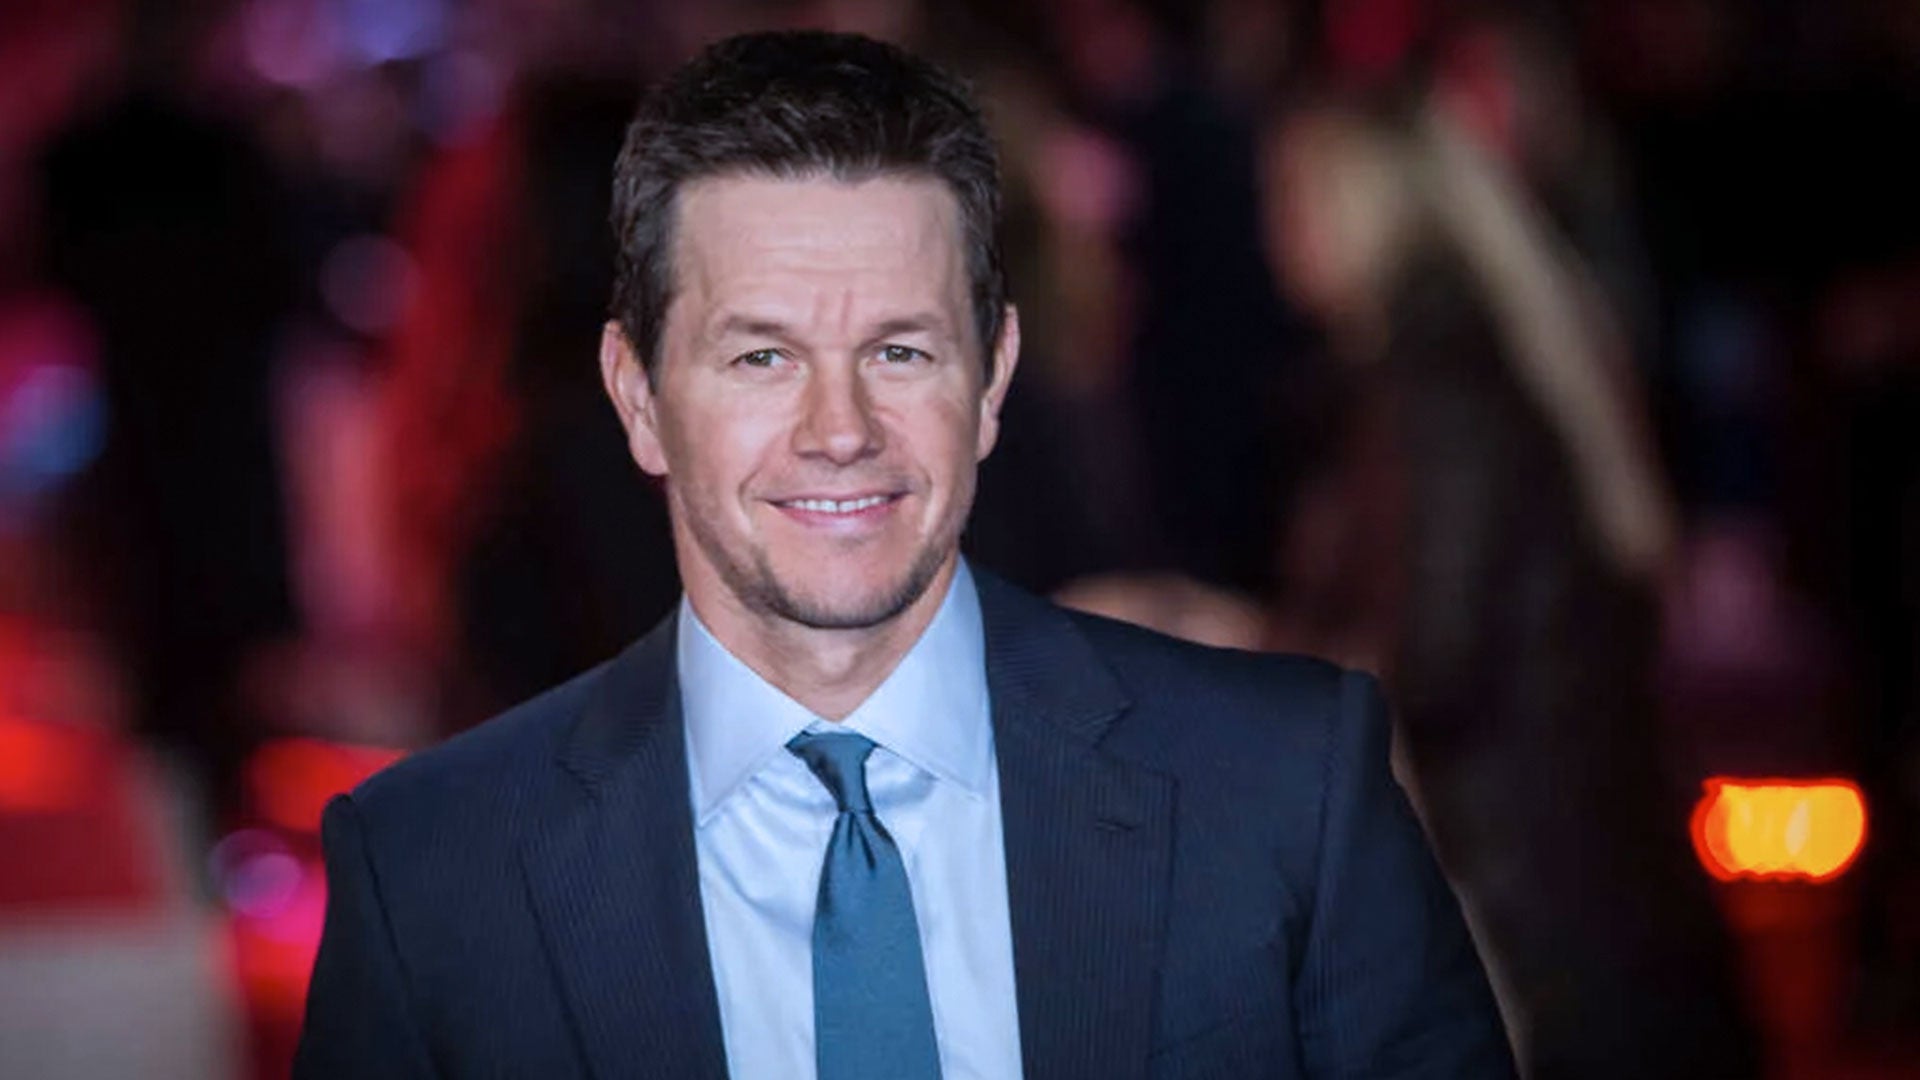 Actor Mark Wahlberg attributes all his success to his faith: 'Stay prayed'